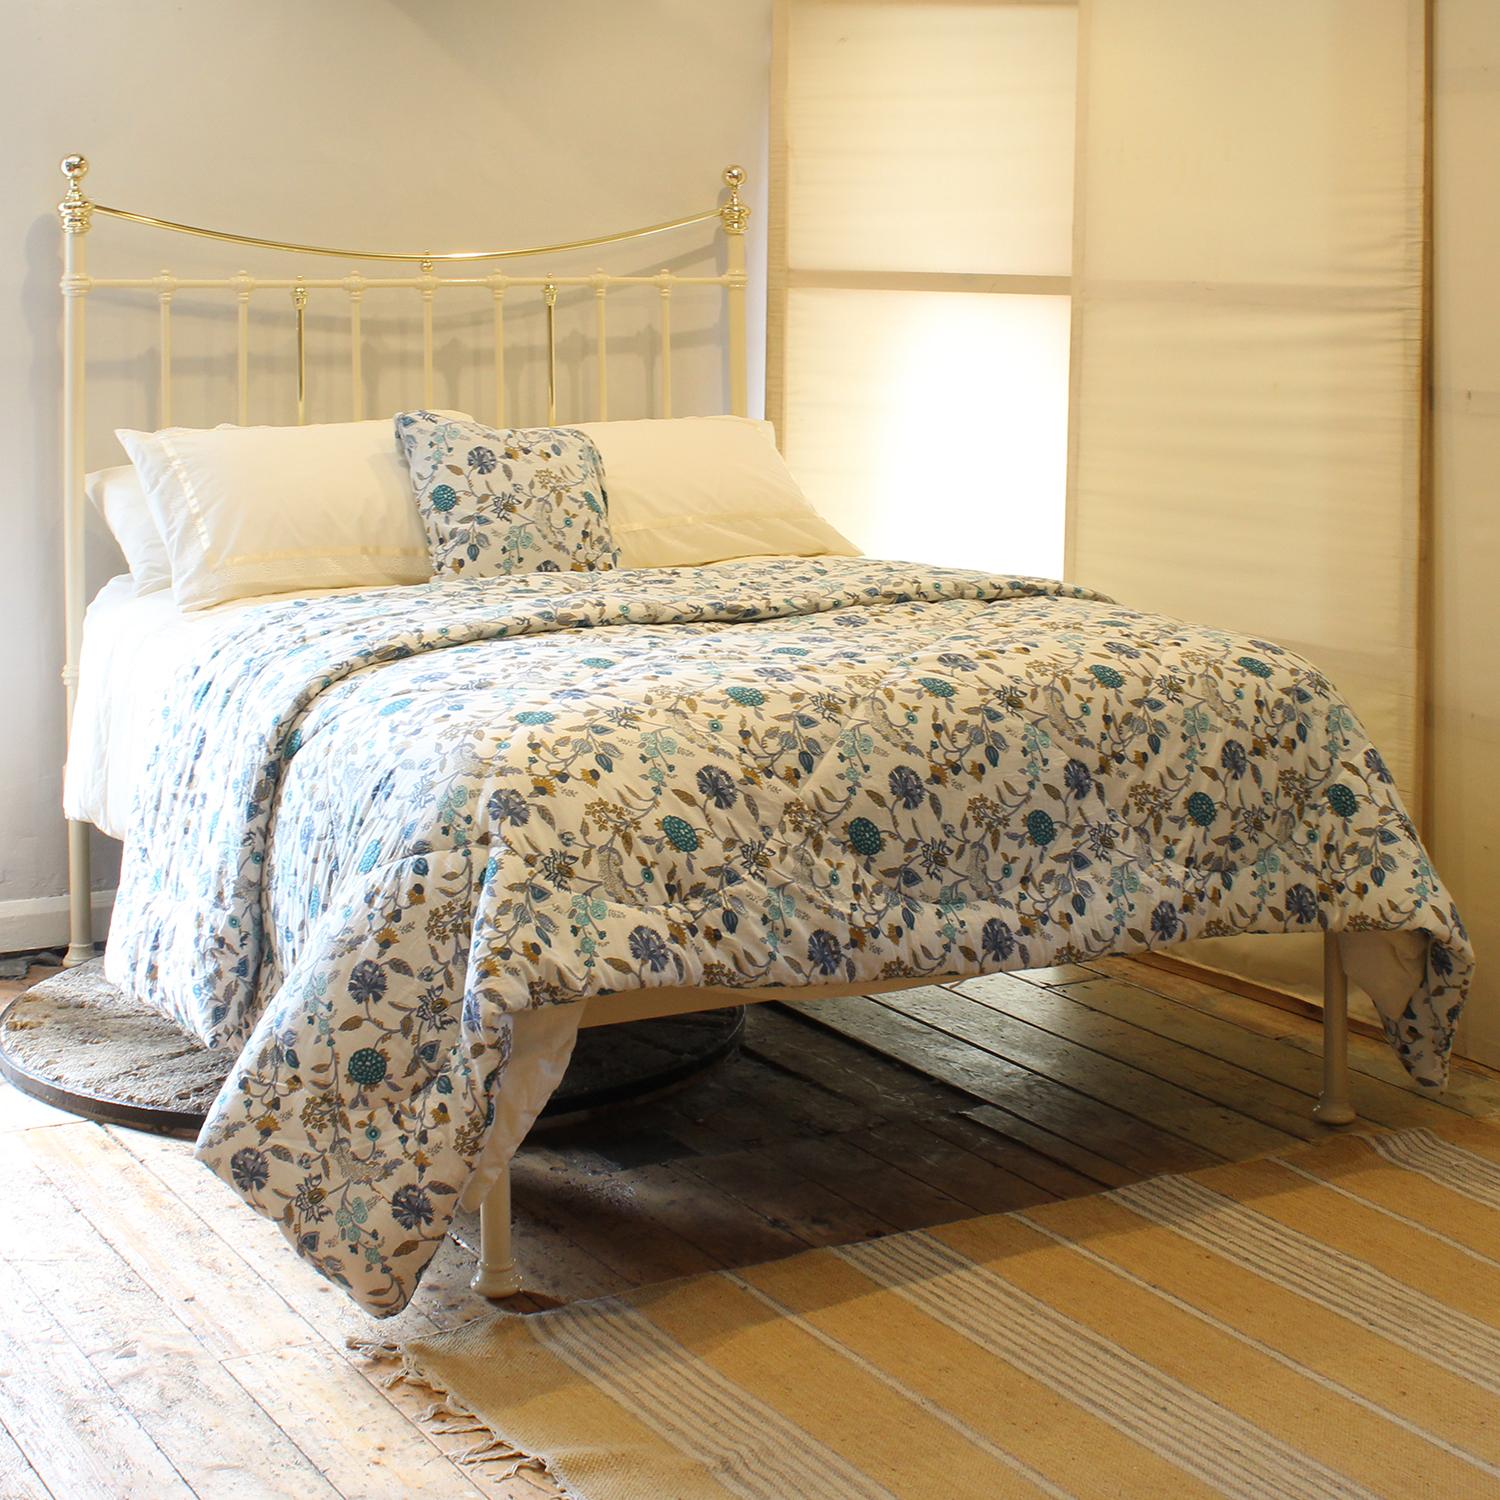 A platform Victorian brass and iron bed finished in cream with brass curved top rail.

This bed accepts a US Queen size (or UK King Size) 60 inch wide base and mattress set.

The price includes a firm standard bed base to support the mattress.

The